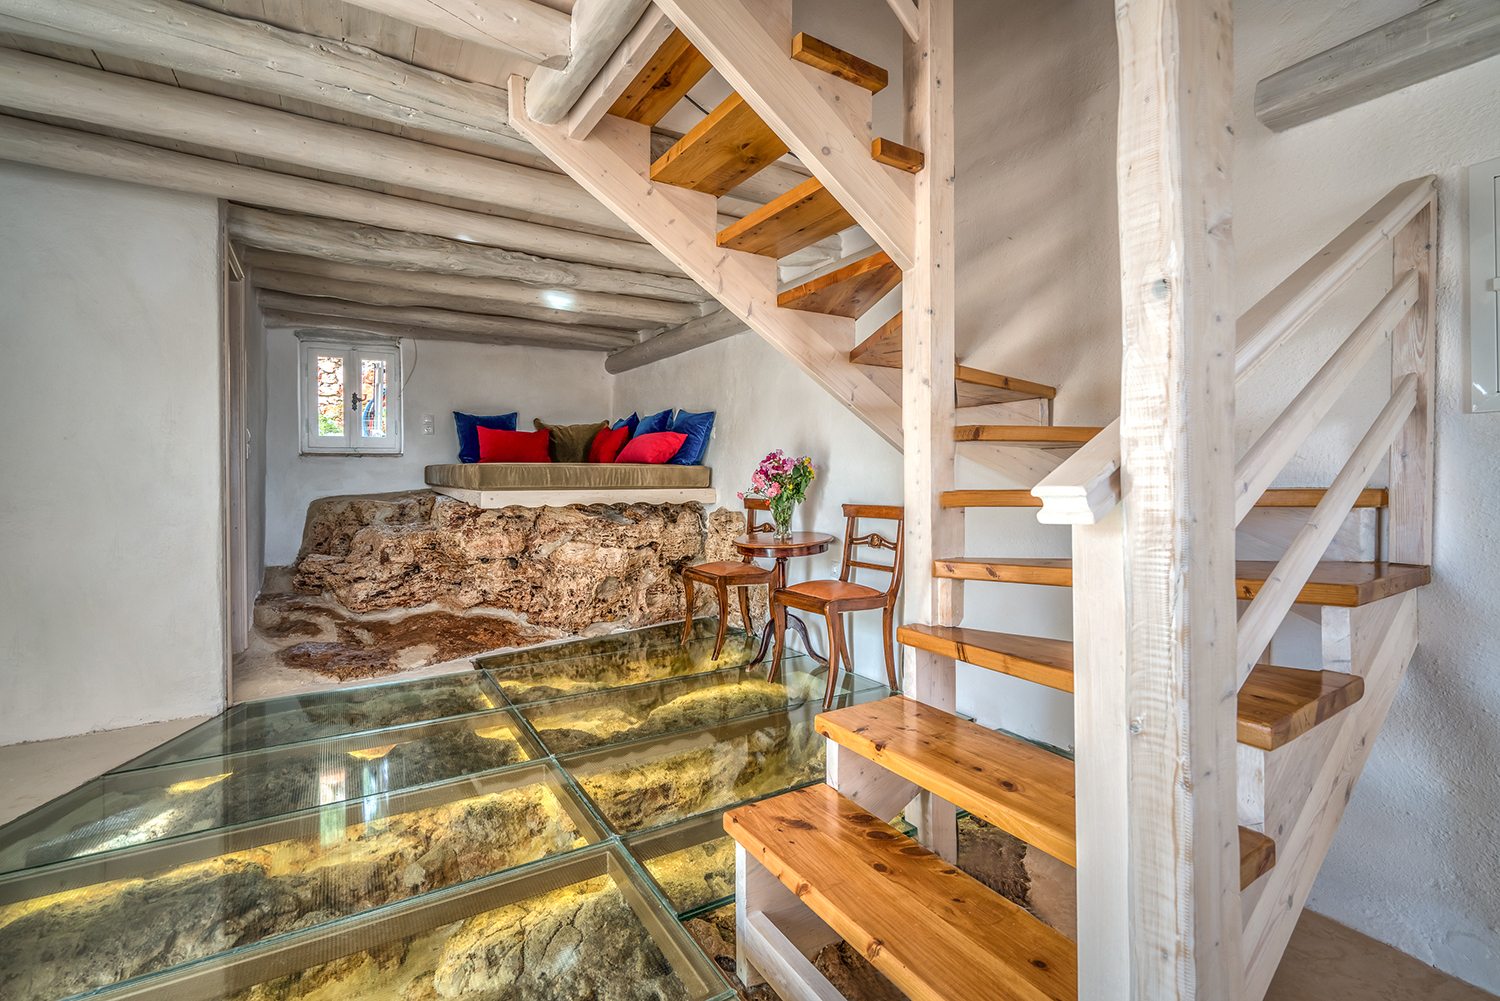 Traditional stone greek villa for 6 people in Zakynthos with blue wooden shutters and plants in terracotta pots staircase and glass floor exposing rocks below